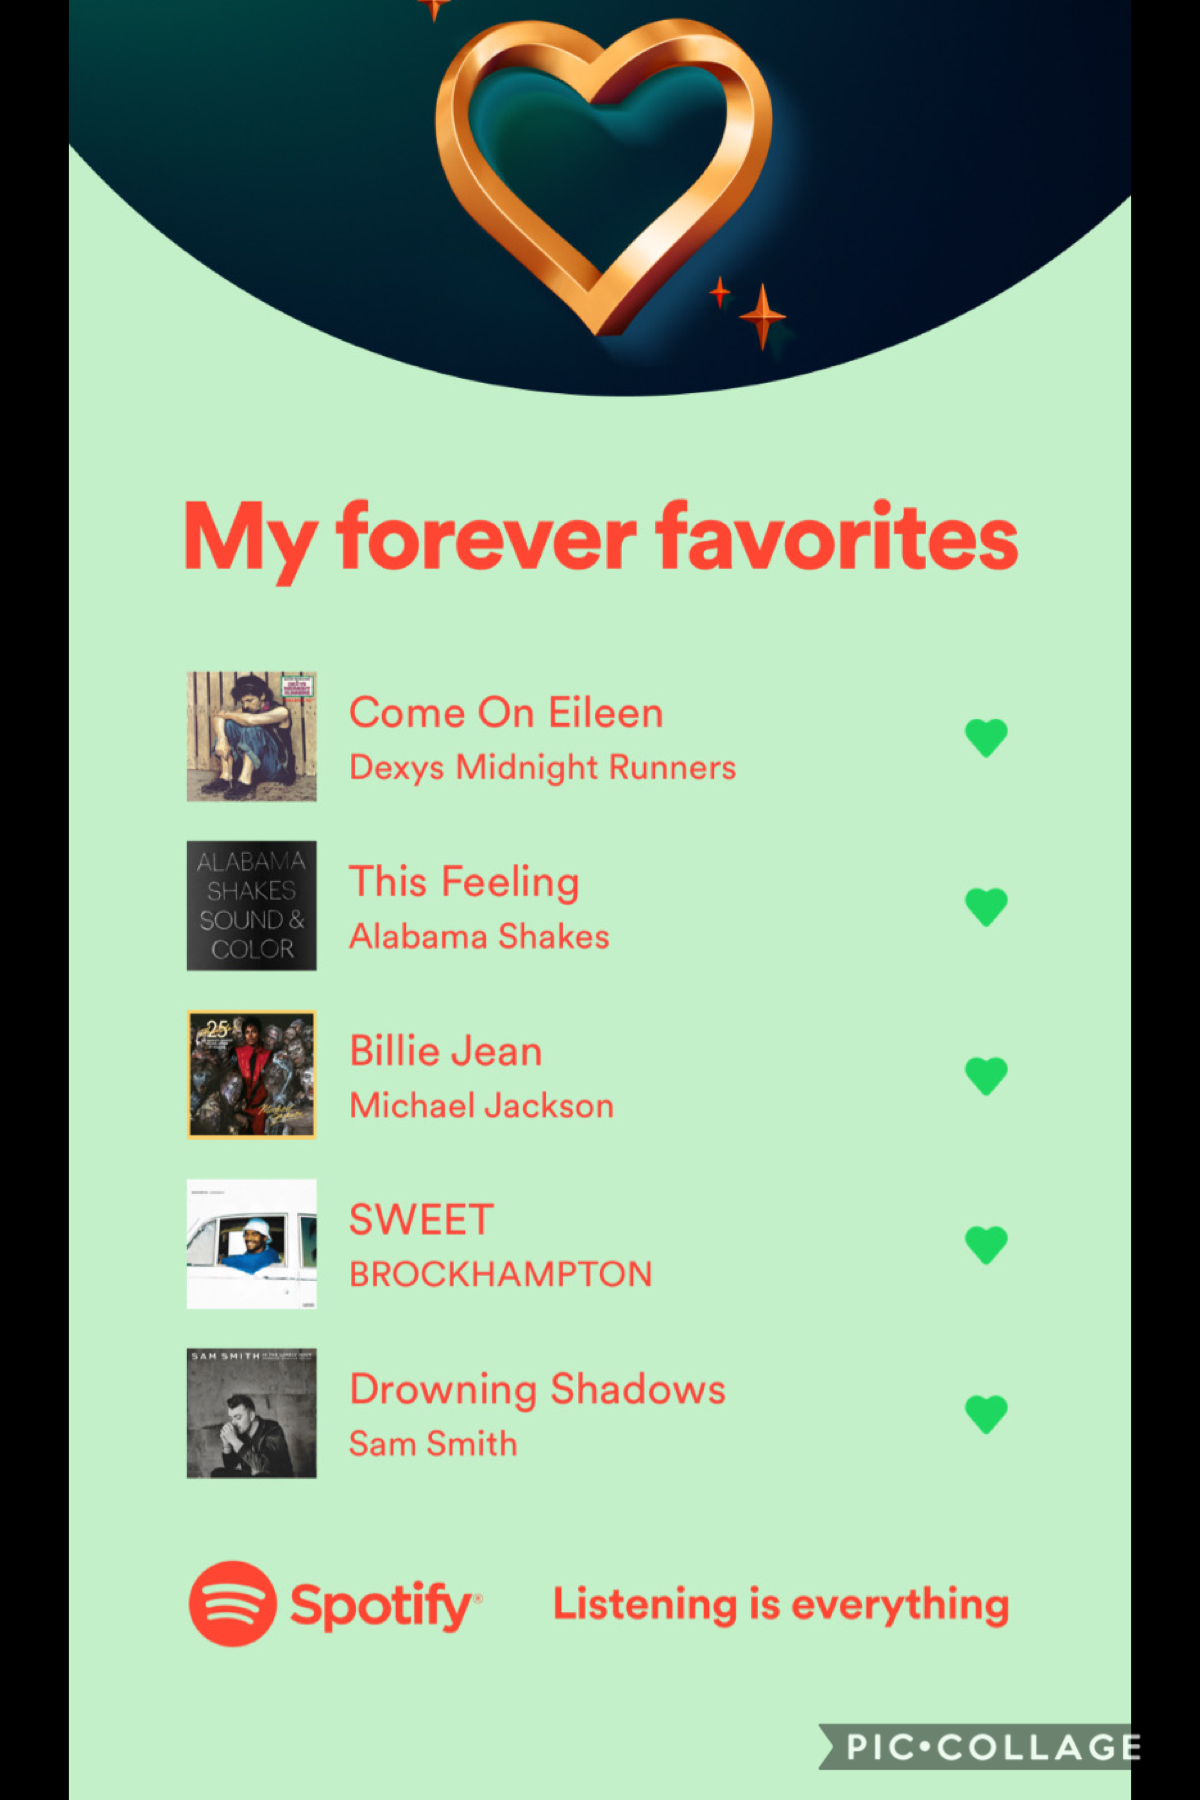 spotify: @theastridsaenz 💕 ahh here are some of my all-time favorite songs 🥰 what are some of your forever favorites? always looking for new music so feel free to drop any recs as well hahaha 💖😂😊